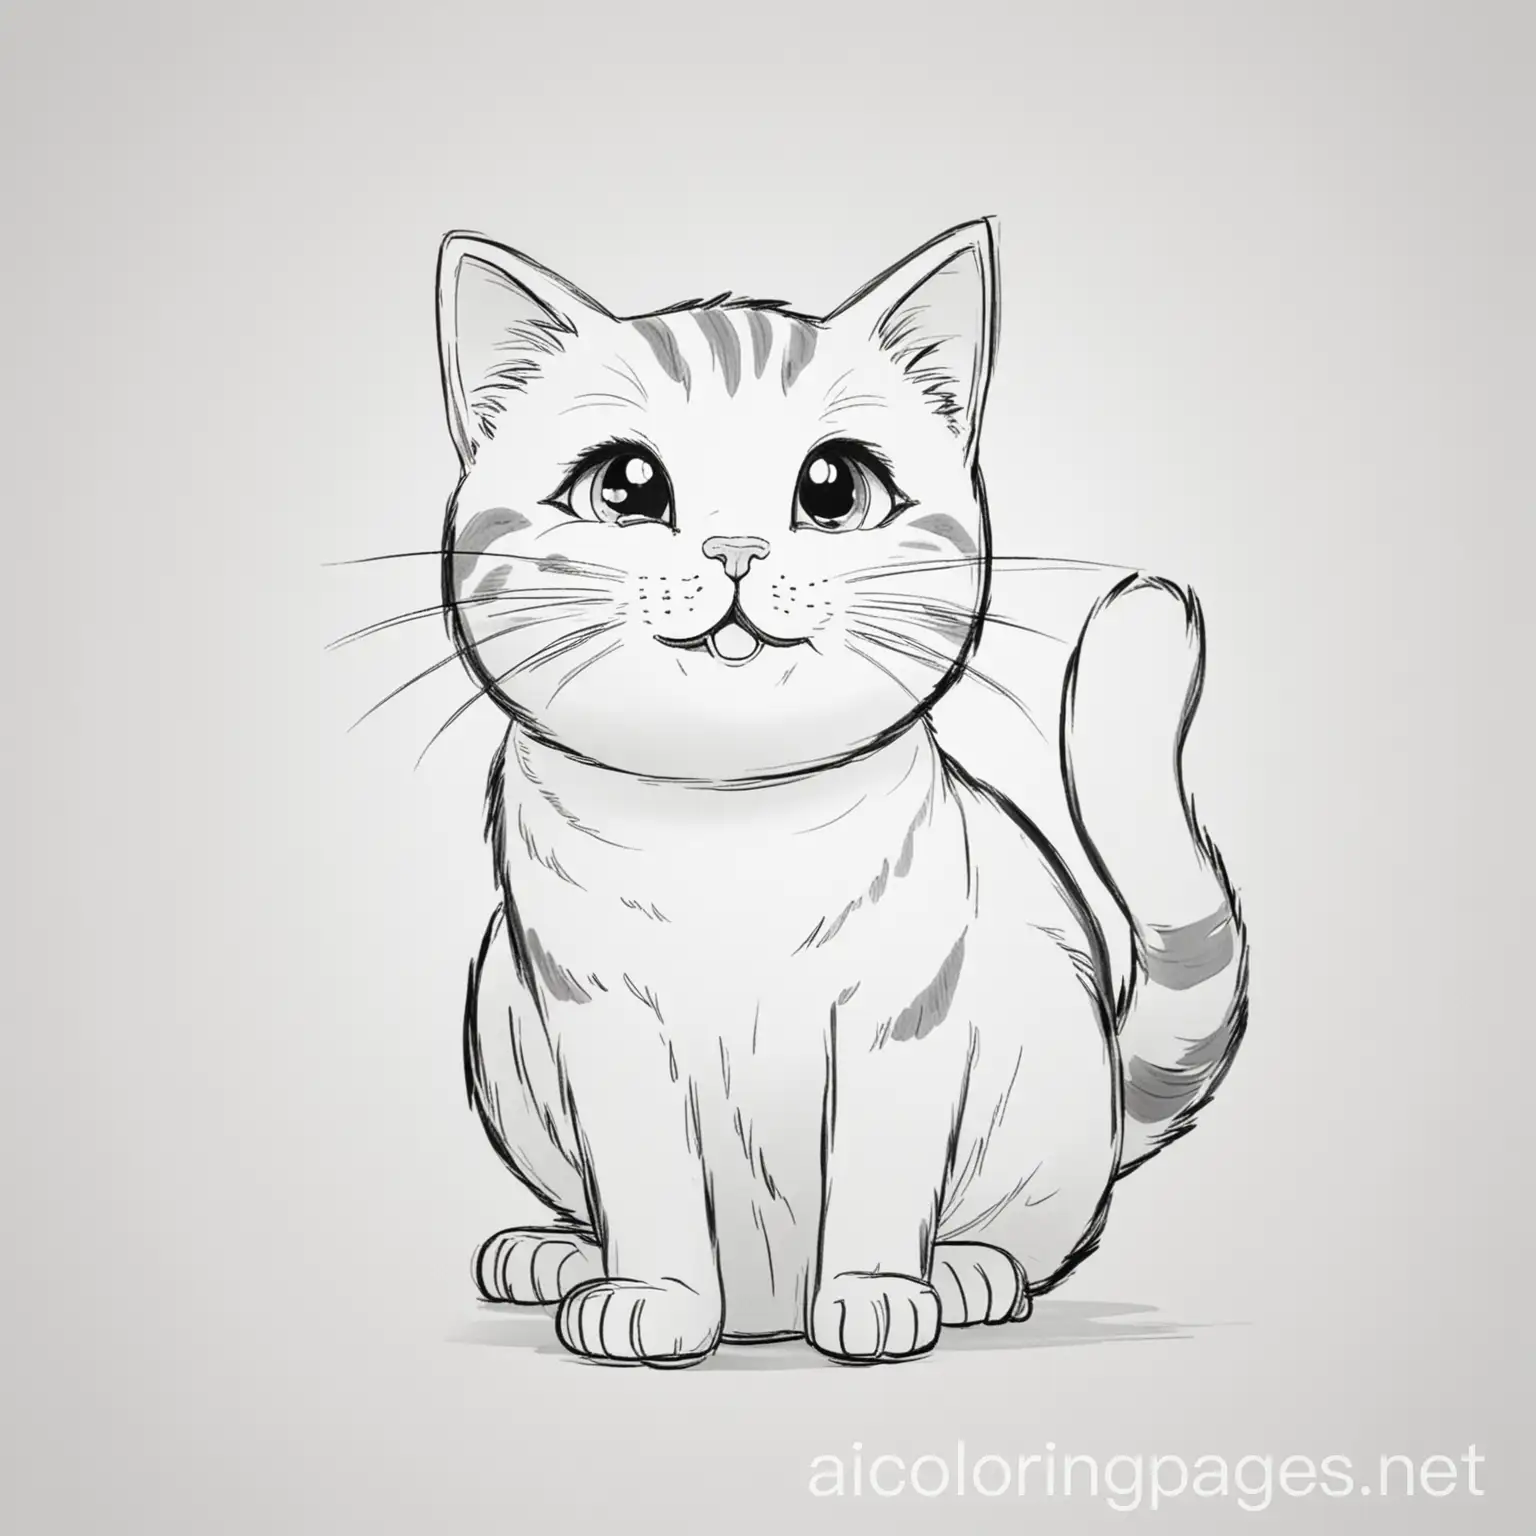 Happy-Cat-Coloring-Page-with-Simplicity-and-Ample-White-Space